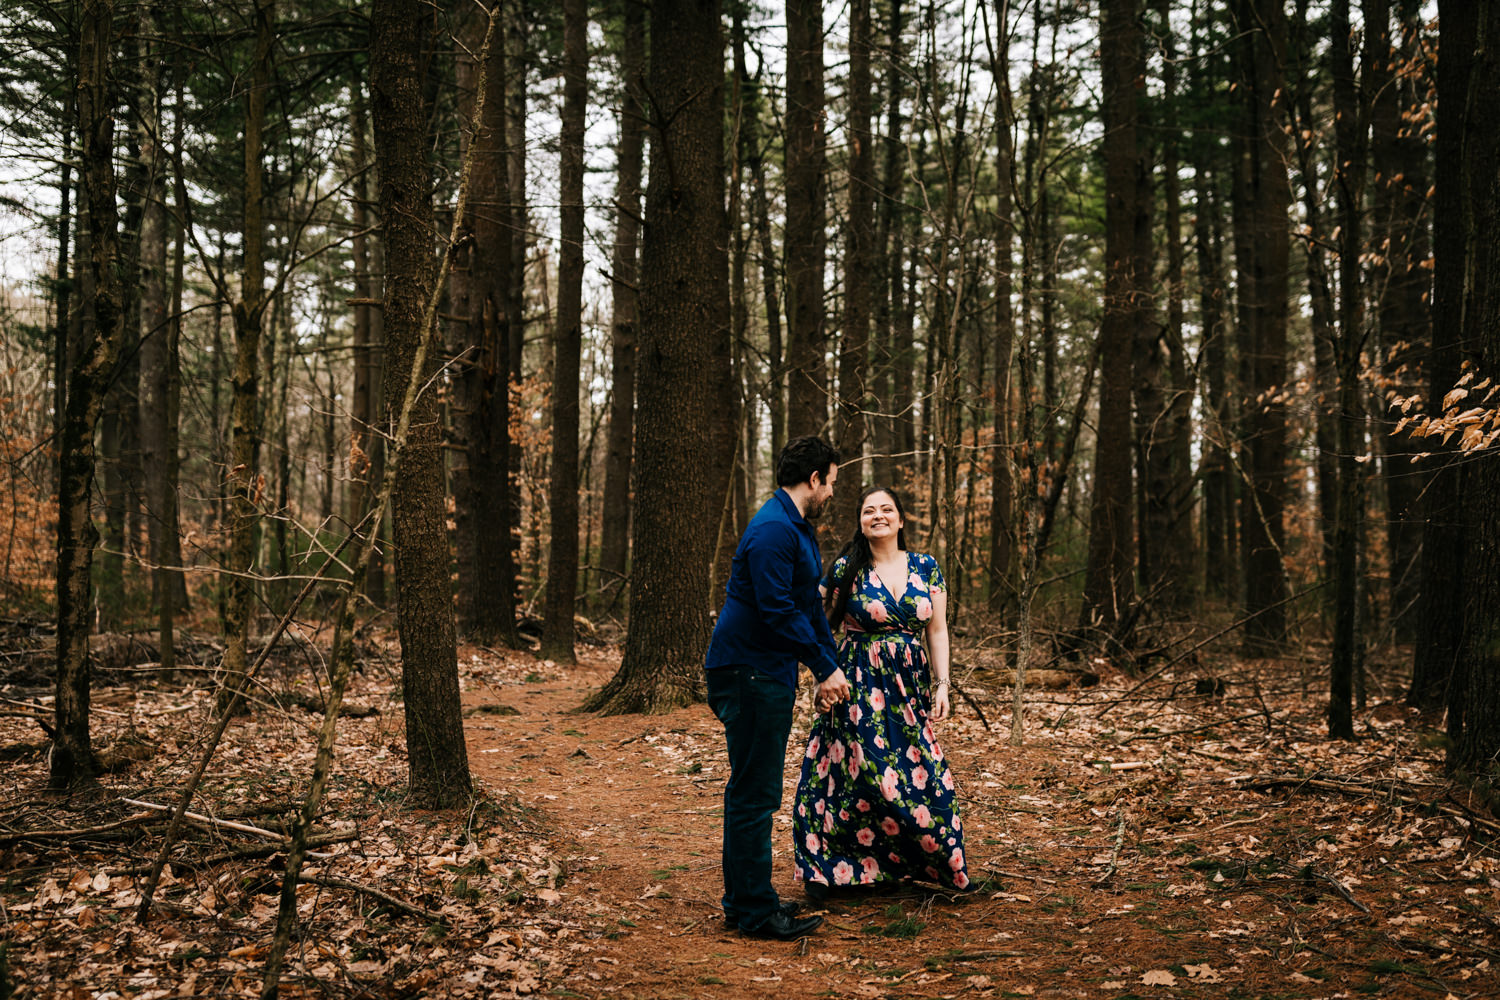 Fun couple dancing in the forest wearing blue floral dress